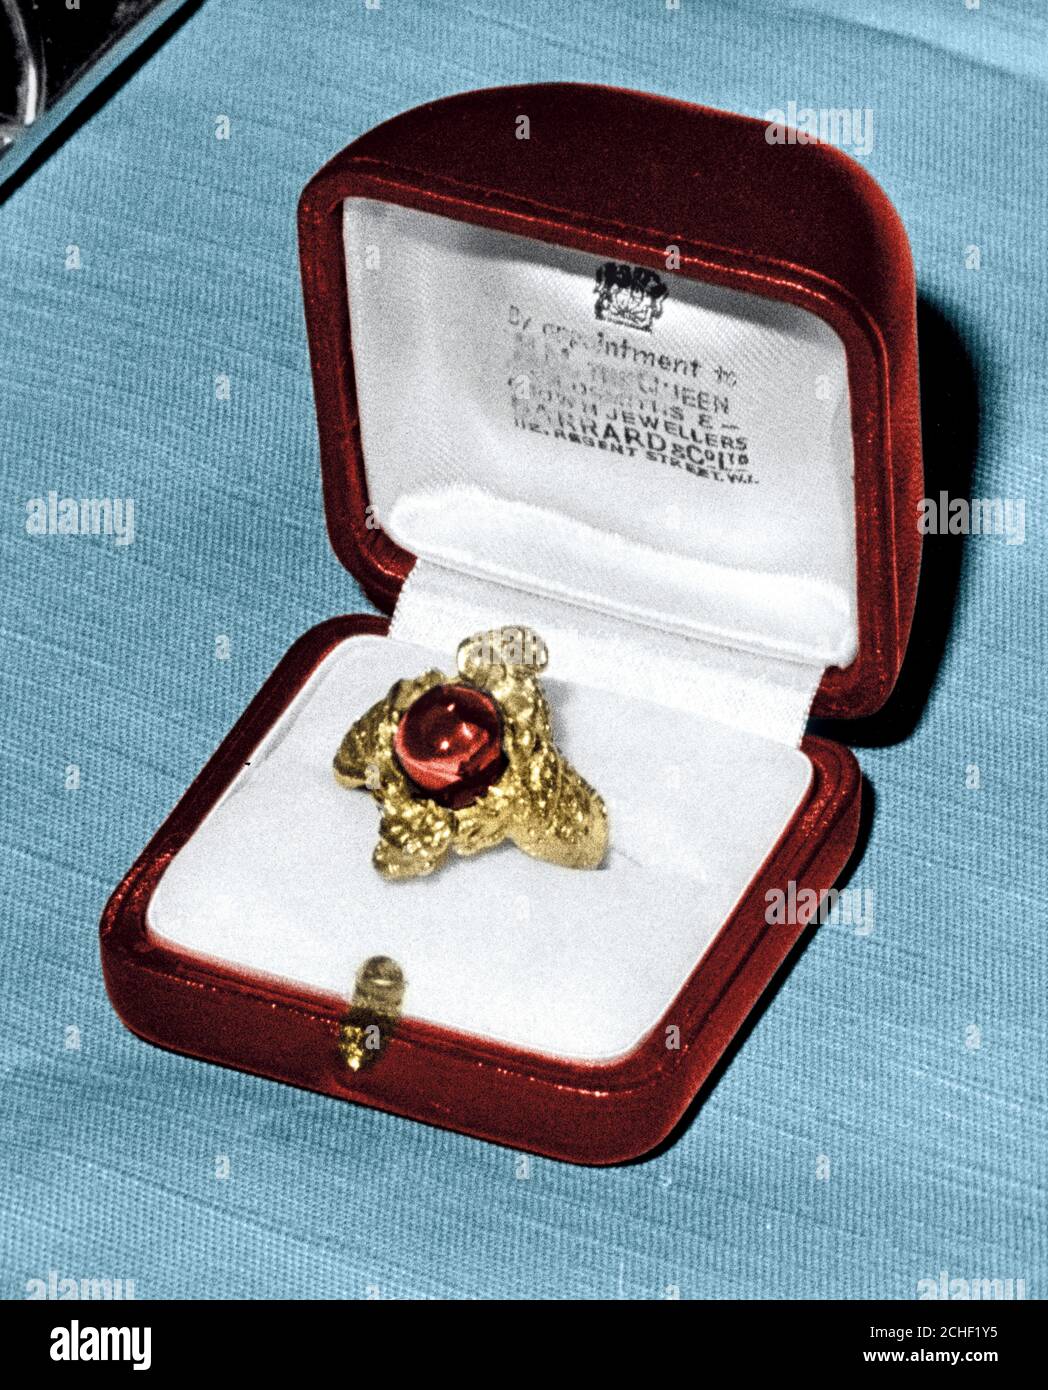 Among the insignia to be worn by Prince Charles at his investiture as Prince of Wales by the Queen at Caernarvon Castle on 1 July 1969 will be this ring, a single cabouchon amethyst held by two Welsh dragons interlaced. The heads and claws form the setting of the stone. It was photographed at St James's Palace, London, today with other of the Prince's insignia made in 1911 by Garrard and Company to the design of the Welsh artist Sir Goscombe John, RA. The pieces are made from gold obtained from the vicinity of Caernarvon. 25 April 1969 James BlackMOL Stock Photo